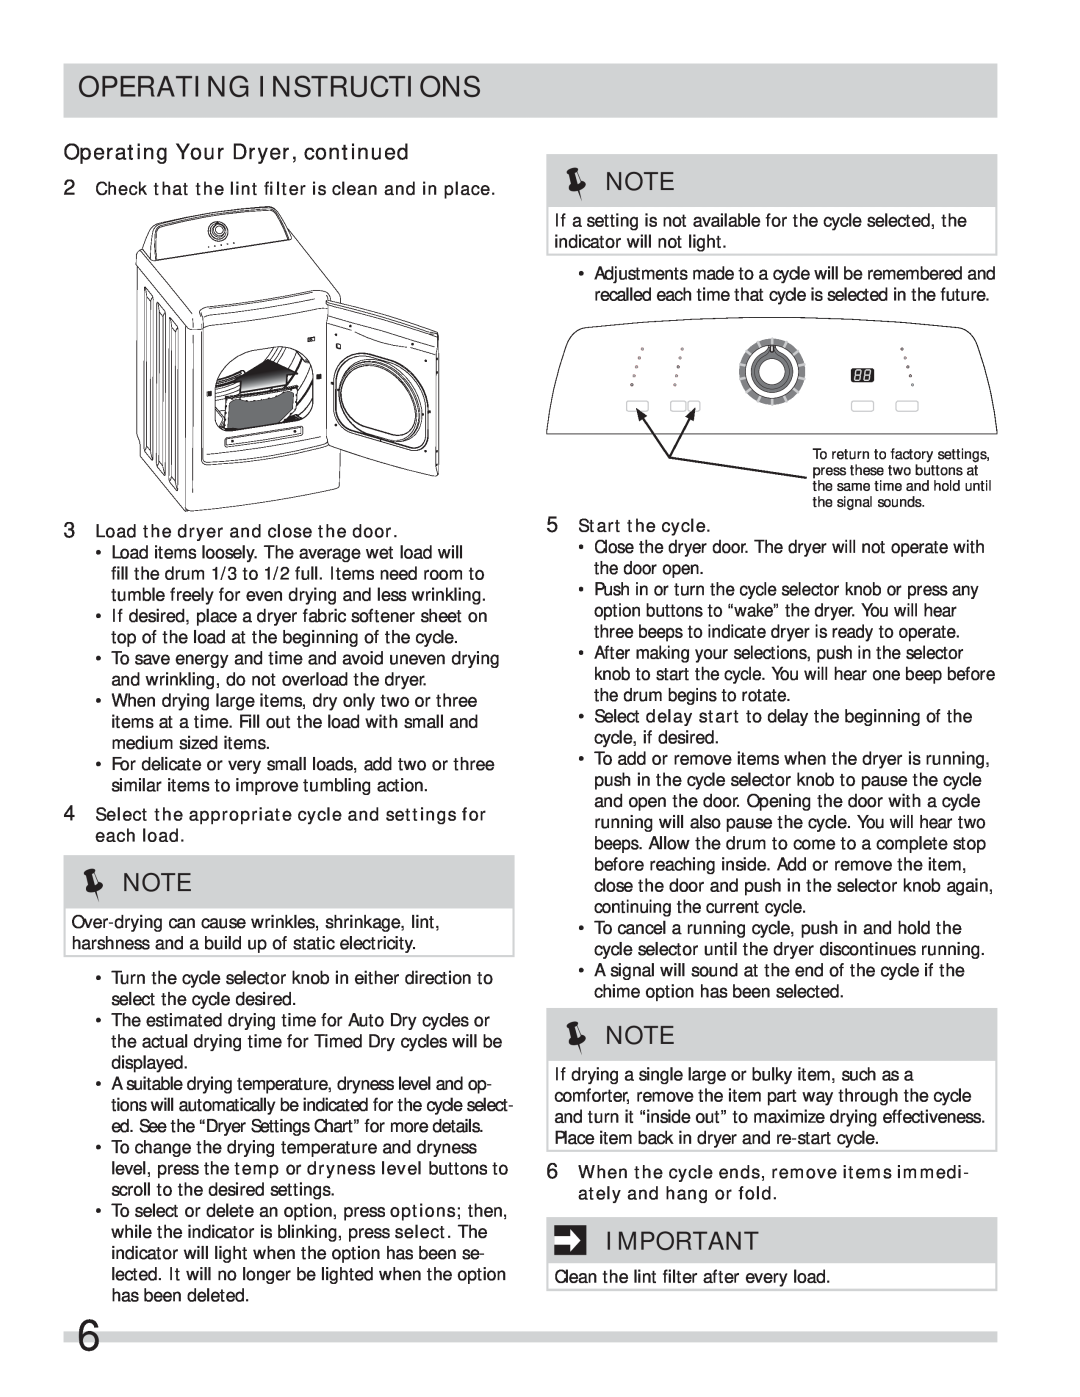 Frigidaire 137409900A(1111) Operating Your Dryer, continued, Operating Instructions, Load the dryer and close the door 